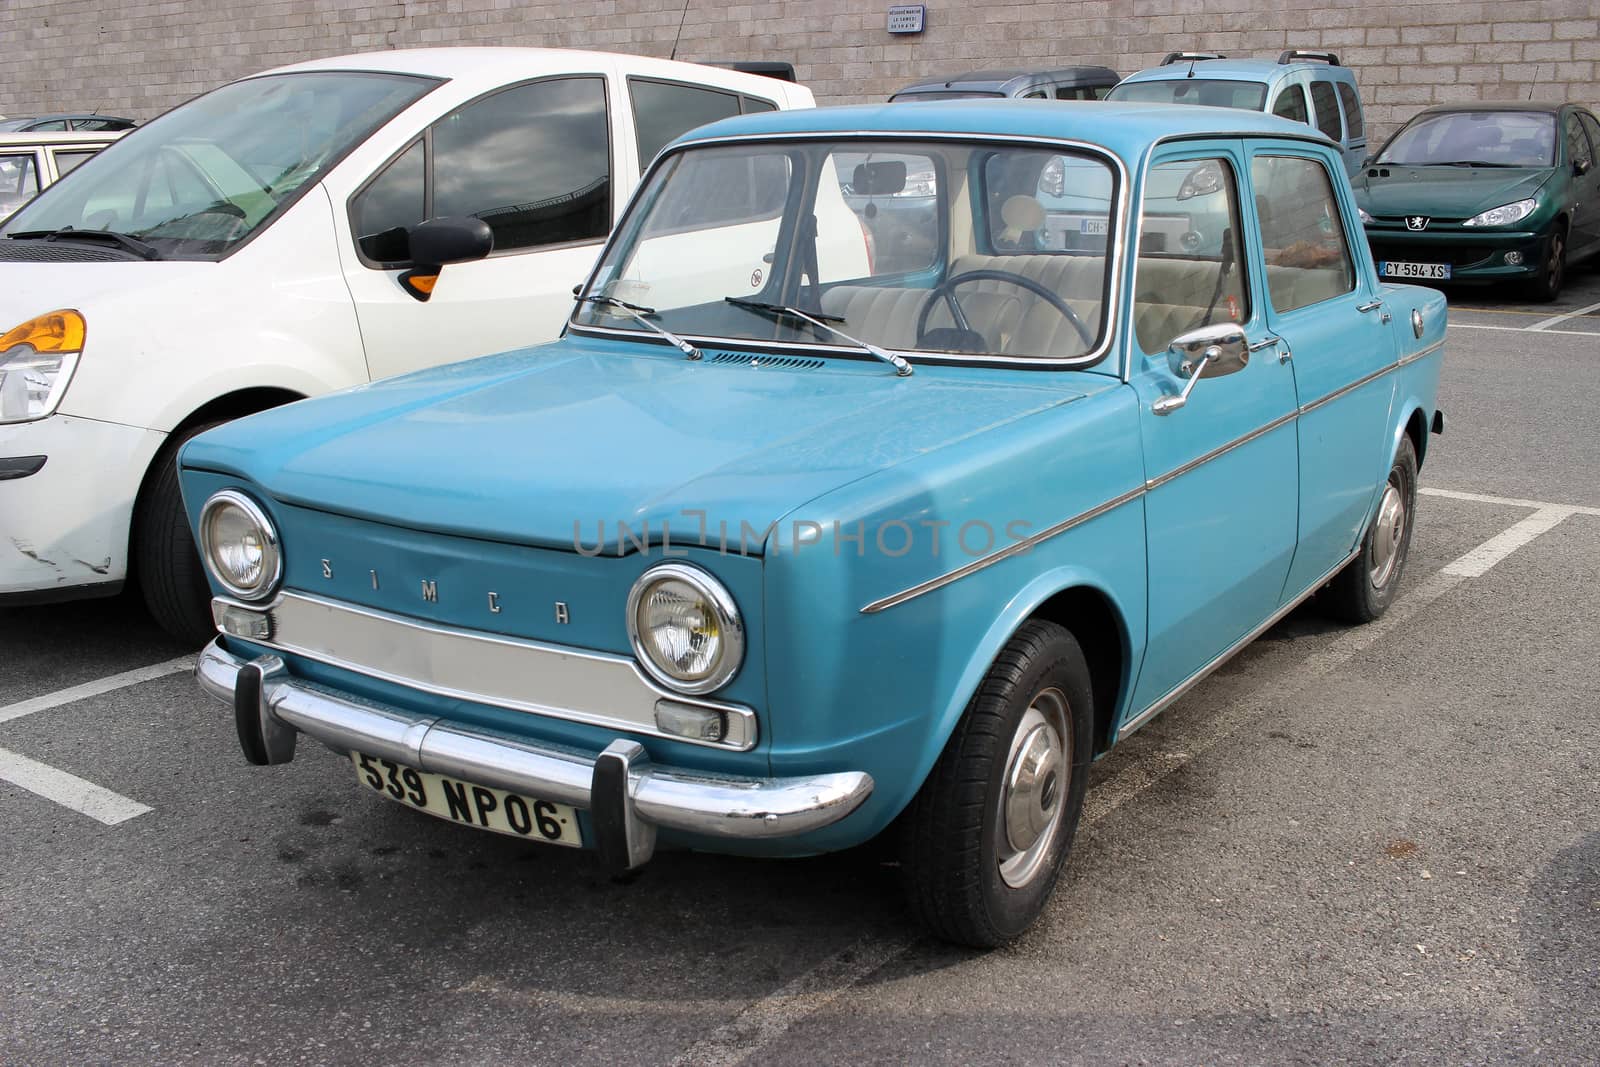 Menton, France - February 26, 2016: Vintage Blue Car Simca 1000 Parked in a Parking Lot of Menton Harbor. South of France